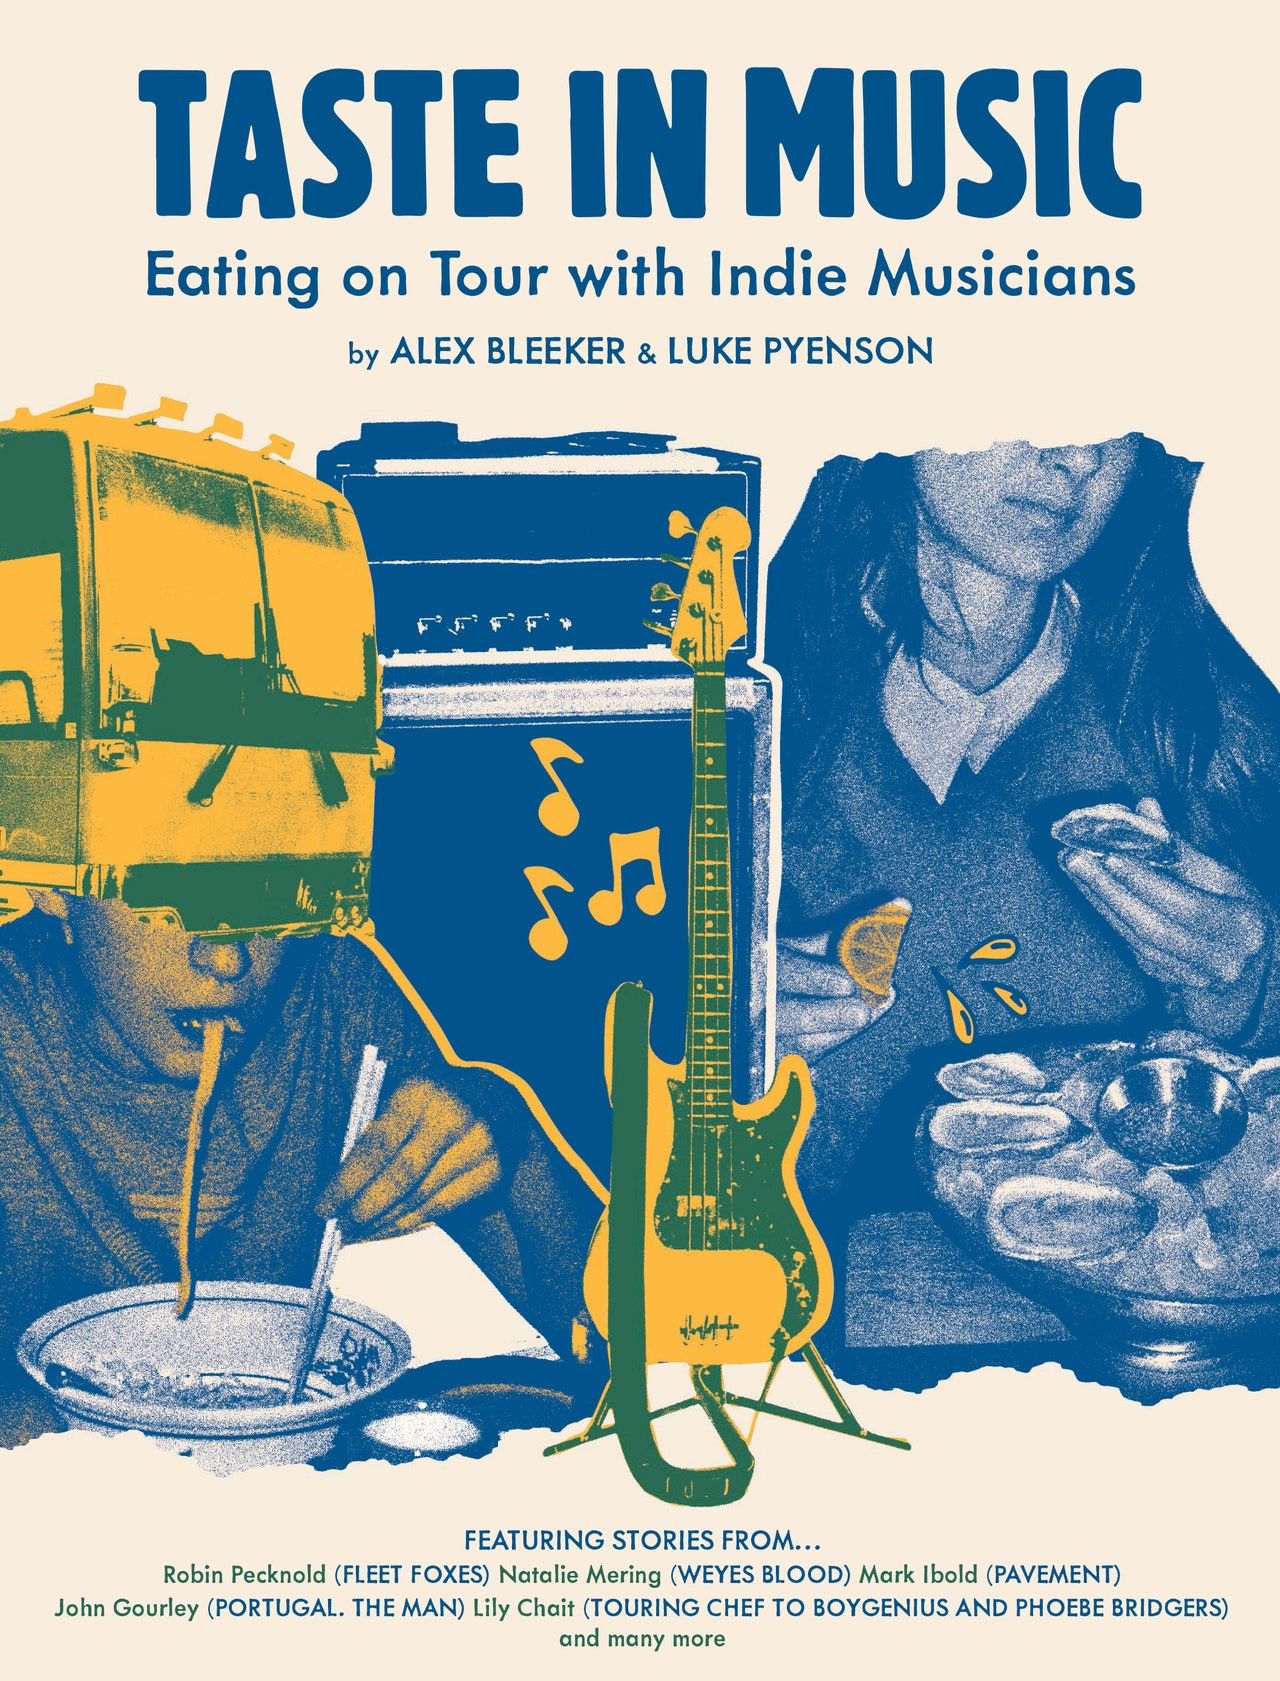 New Book Documents the Eating Habits of Touring Indie Musicians, With Stories From Fleet Foxes, Weyes Blood, and More